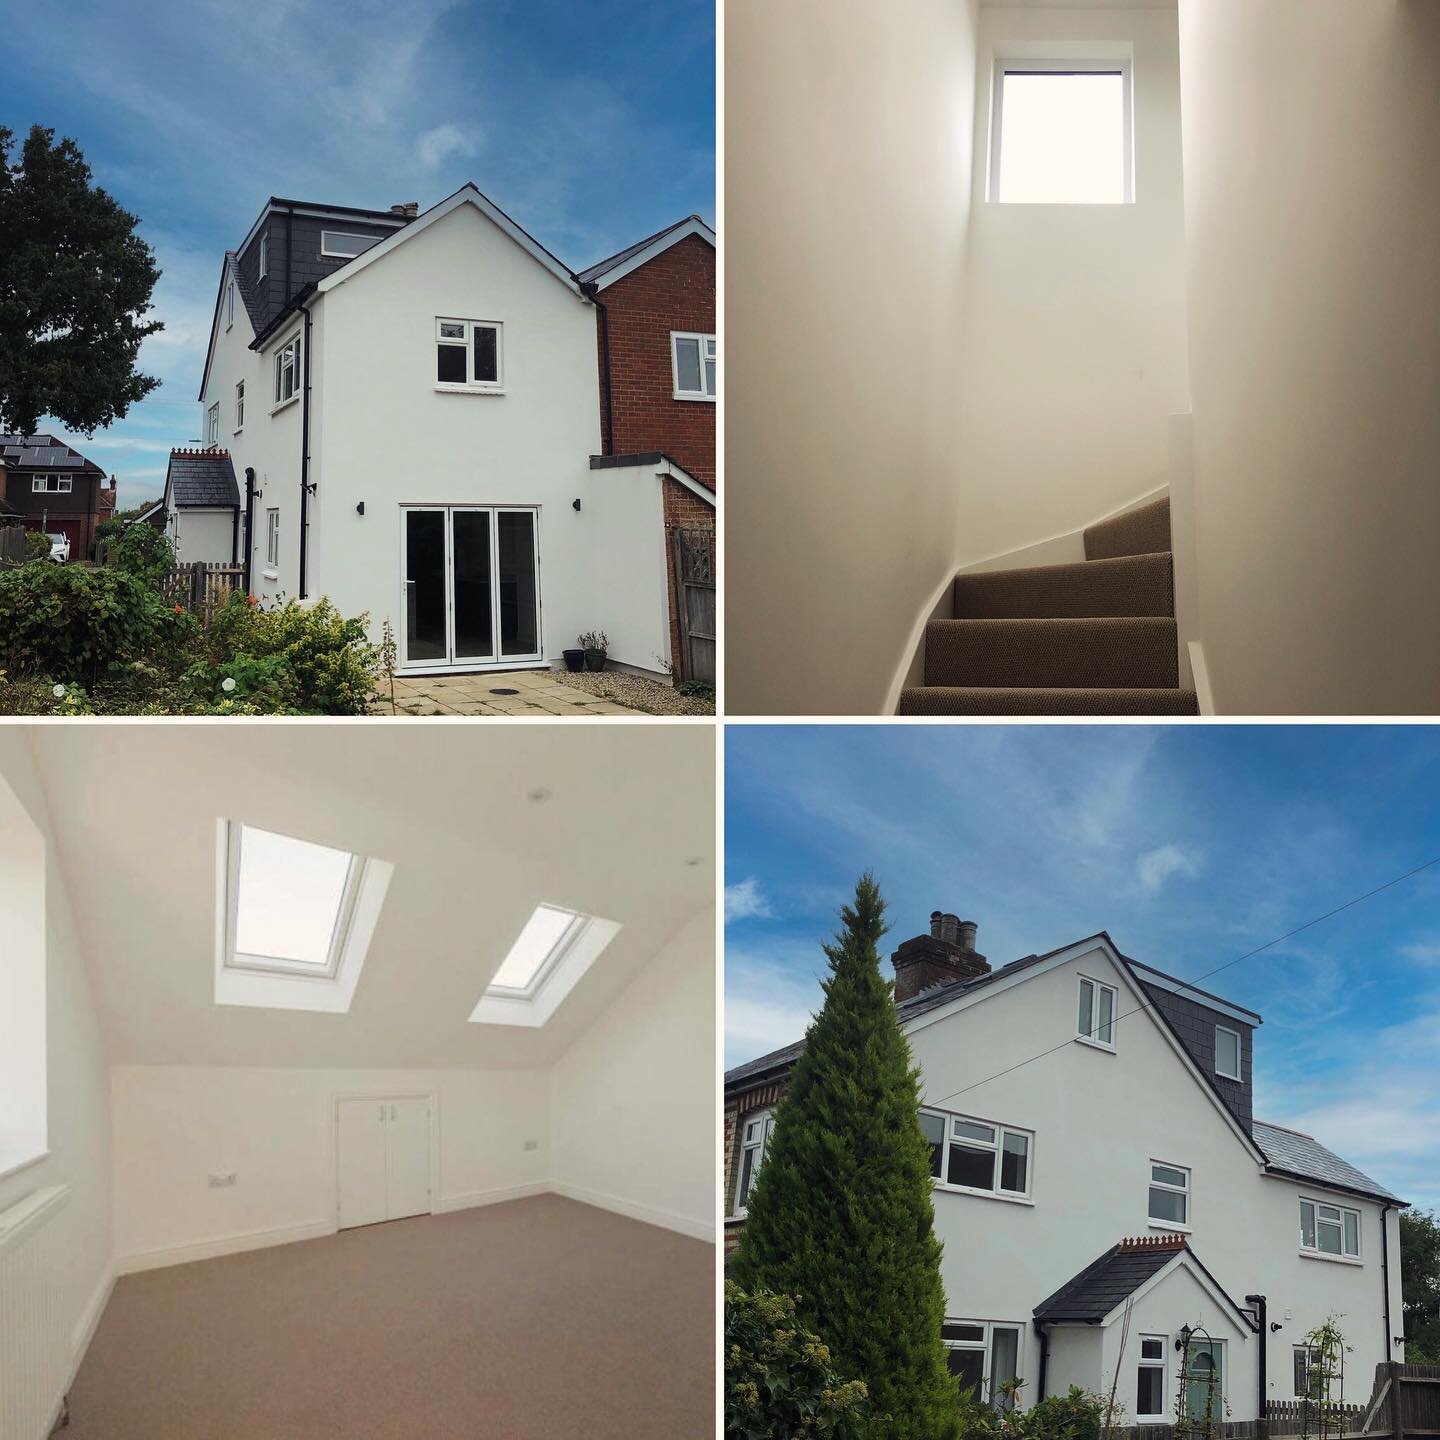 A small dormer can make a big difference.
This house was being renovated to sell and our addition of the dormer created a really valuable third bedroom with en-suite, making it much more attractive as a family home.
#nelsontaylor #farnham #loftextens